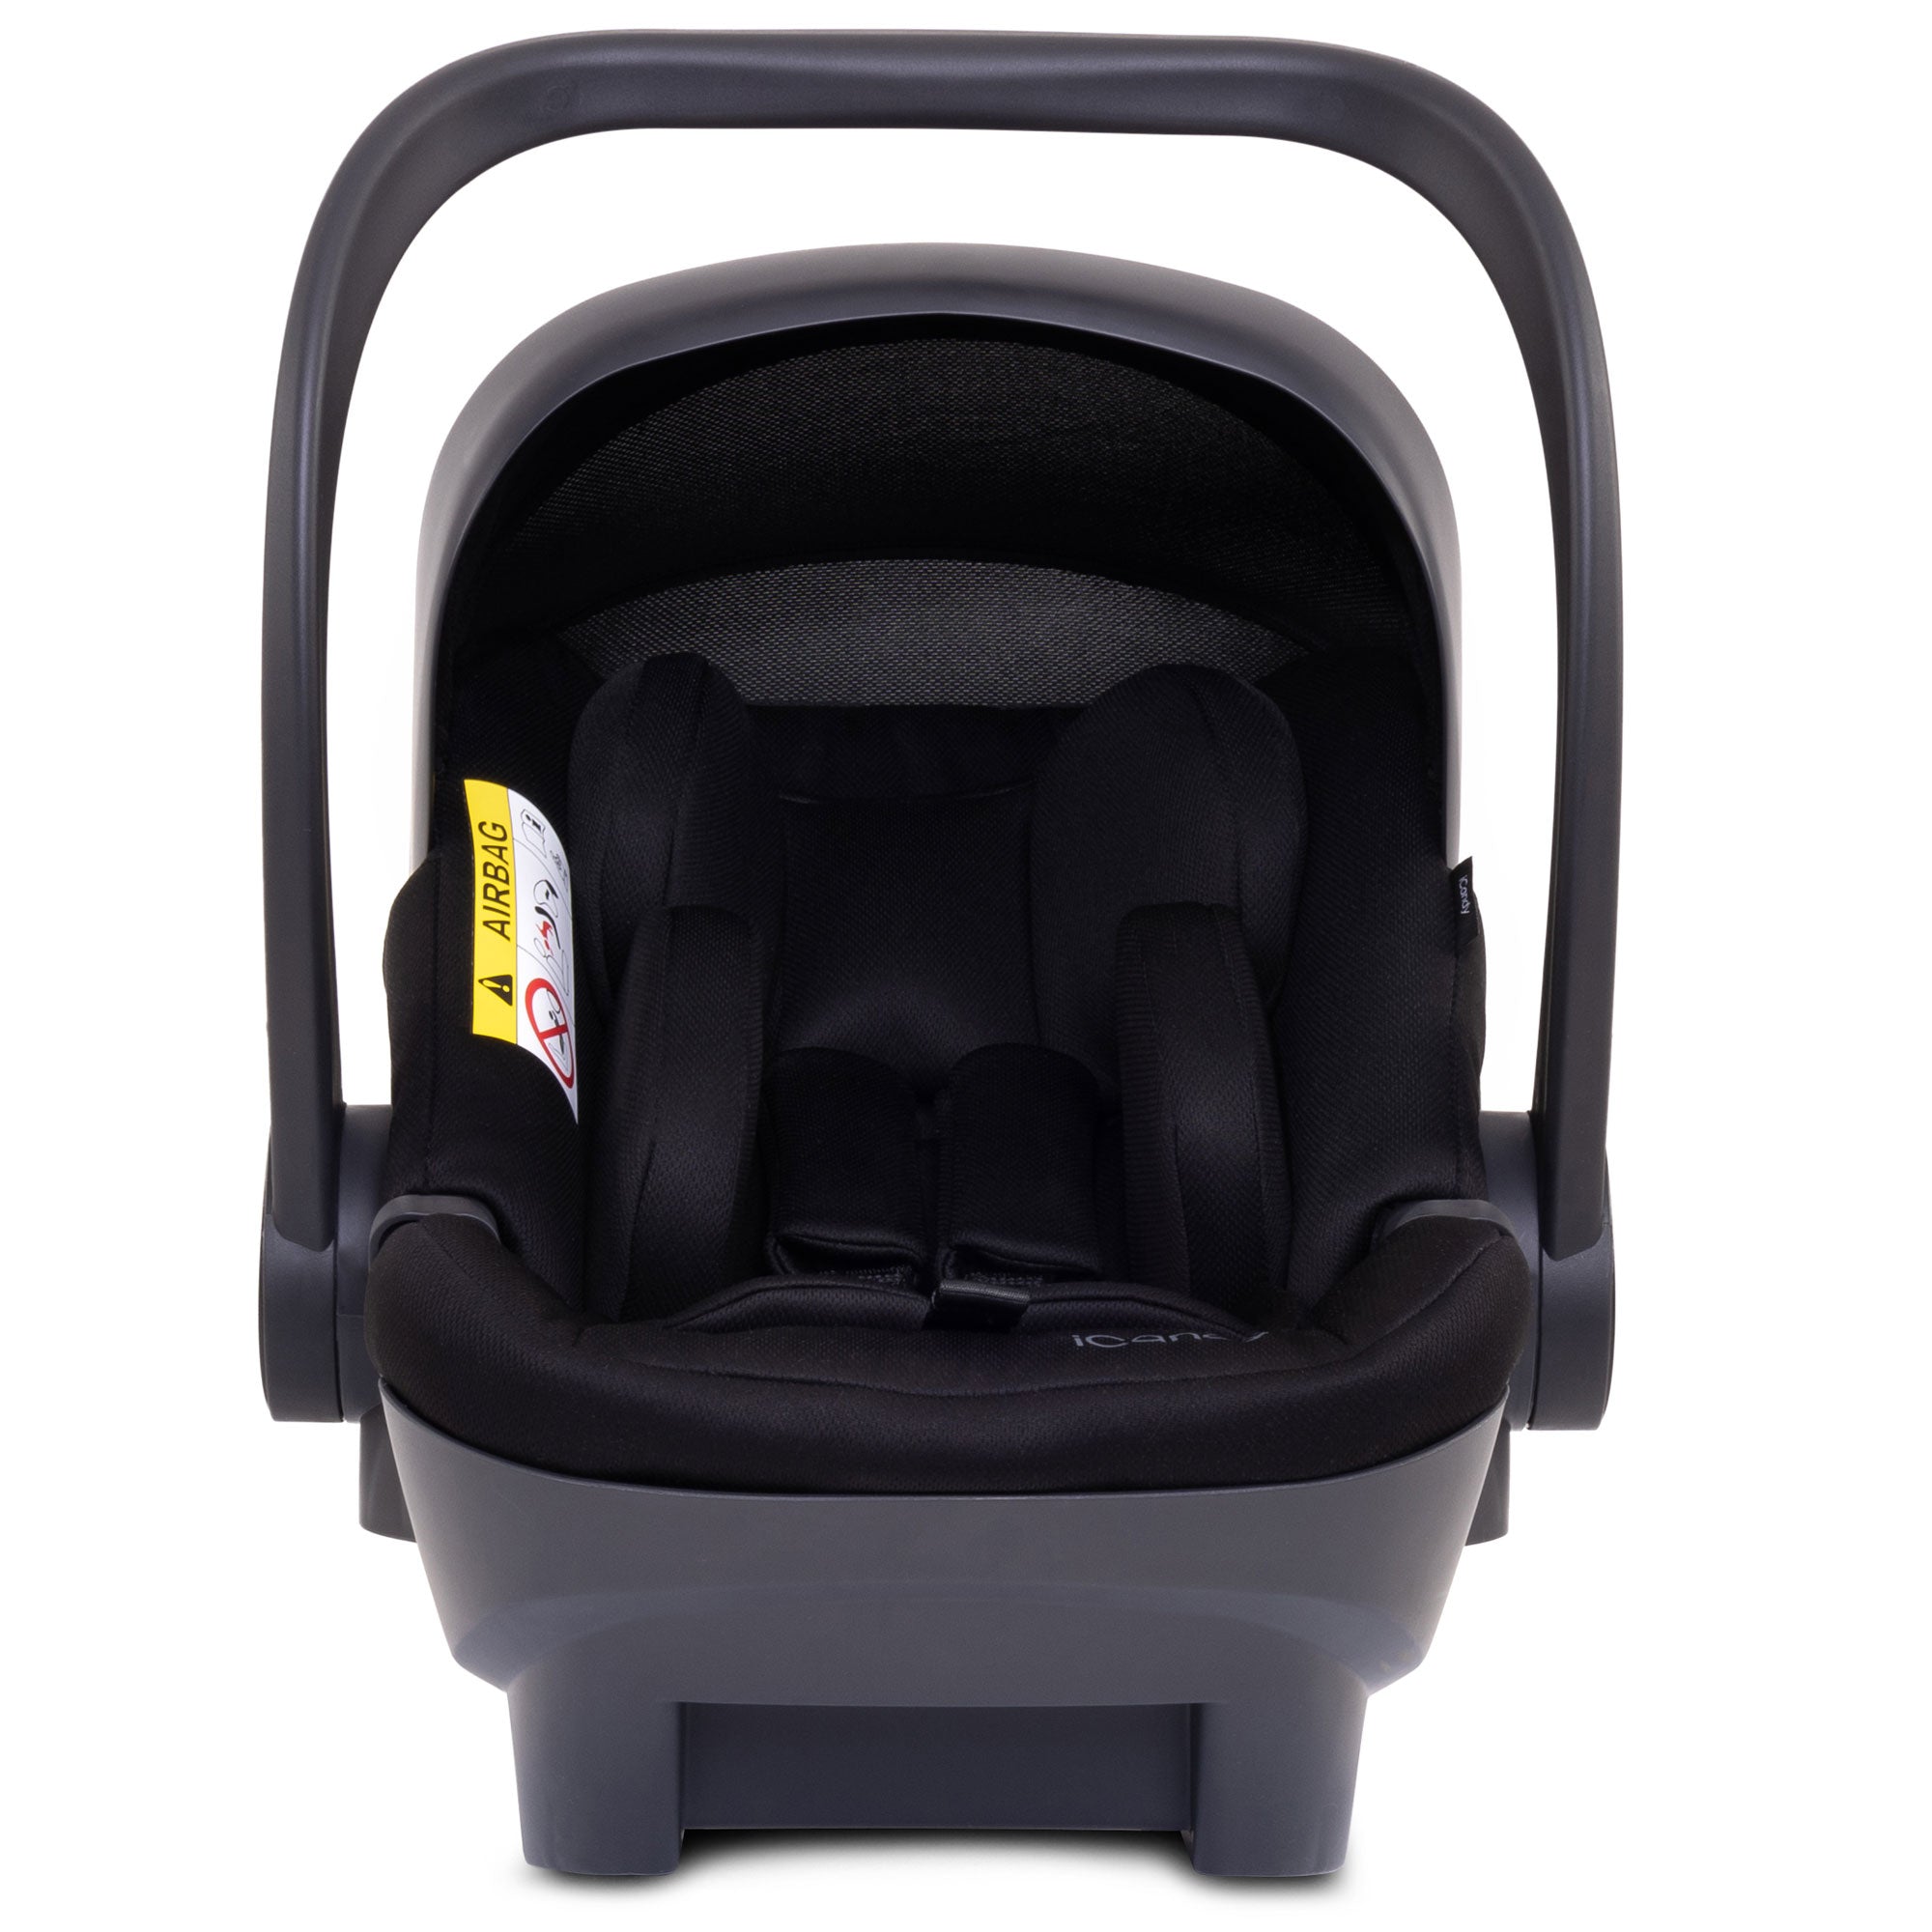 iCandy Peach 7 Complete Bundle with COCOON Car Seat in Ivy